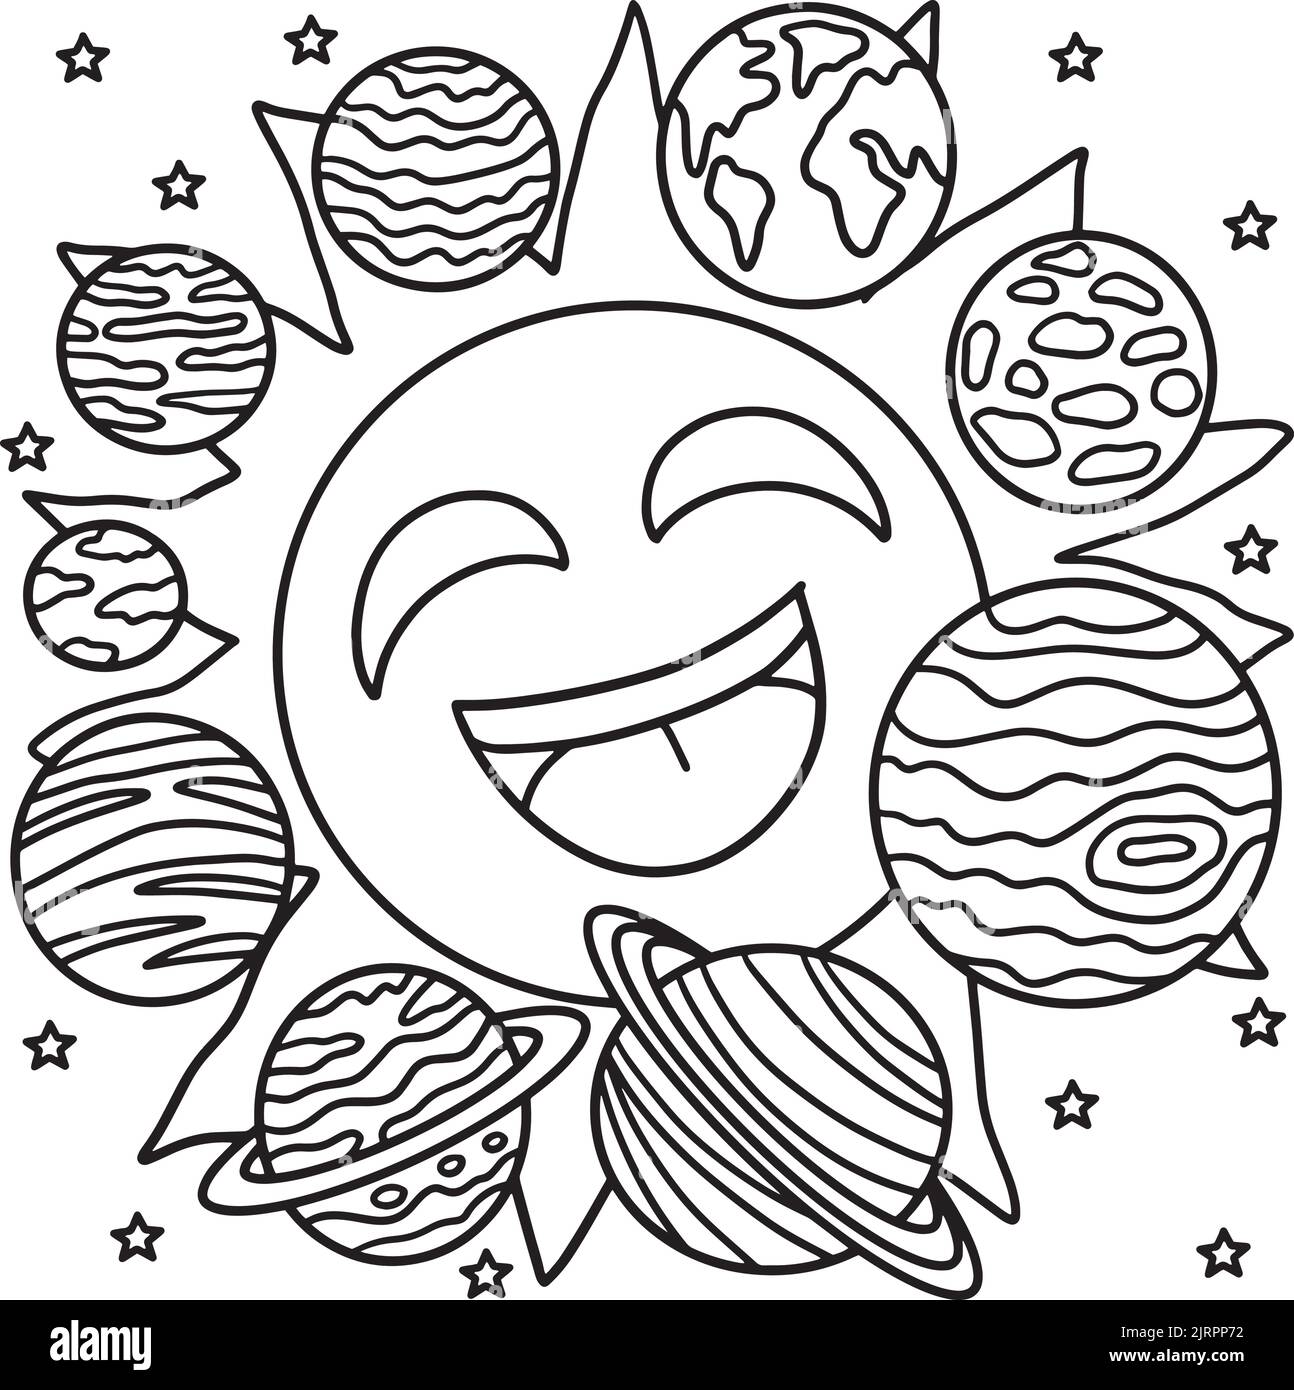 Happy Sun and Solar System Coloring Page für Kinder Stock Vektor